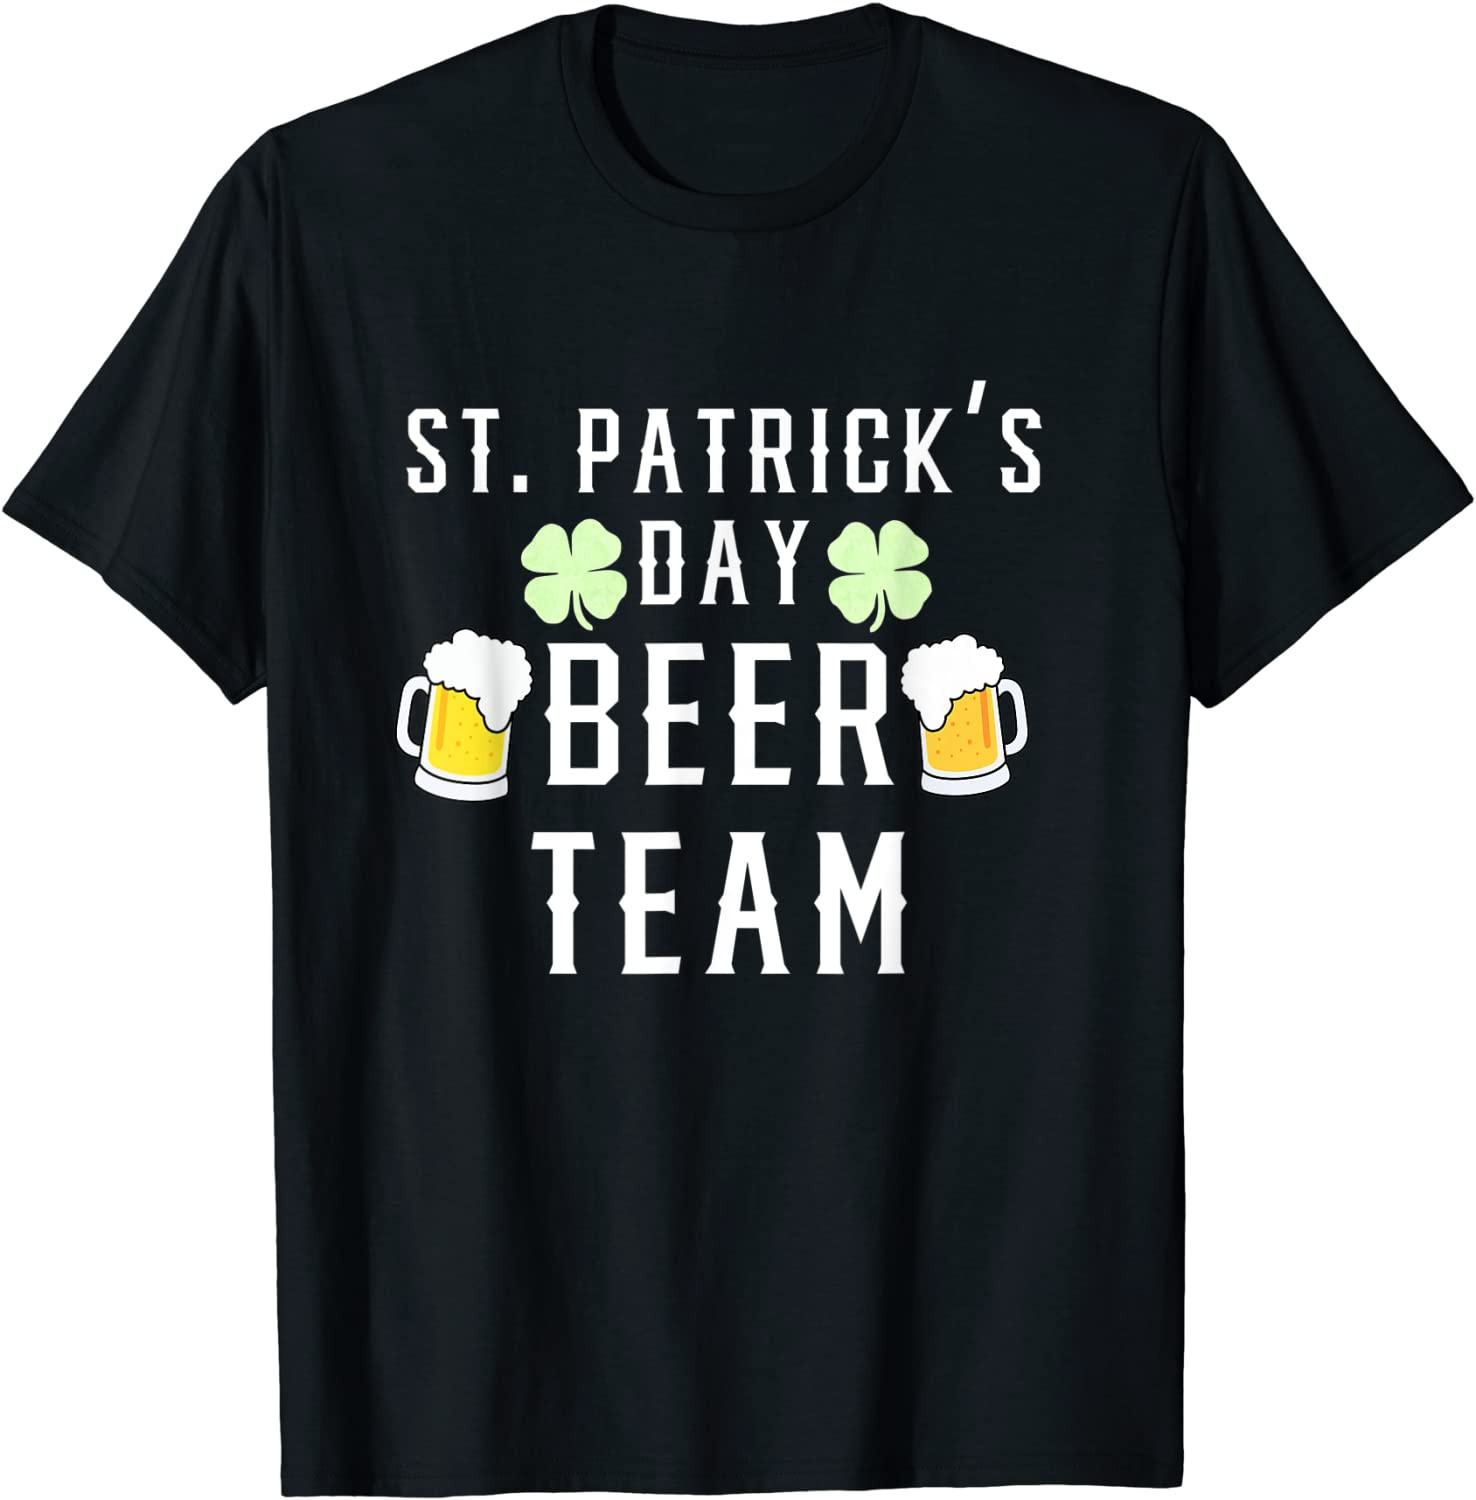 St. Patrick's Day Beer Team Drinking T-Shirt